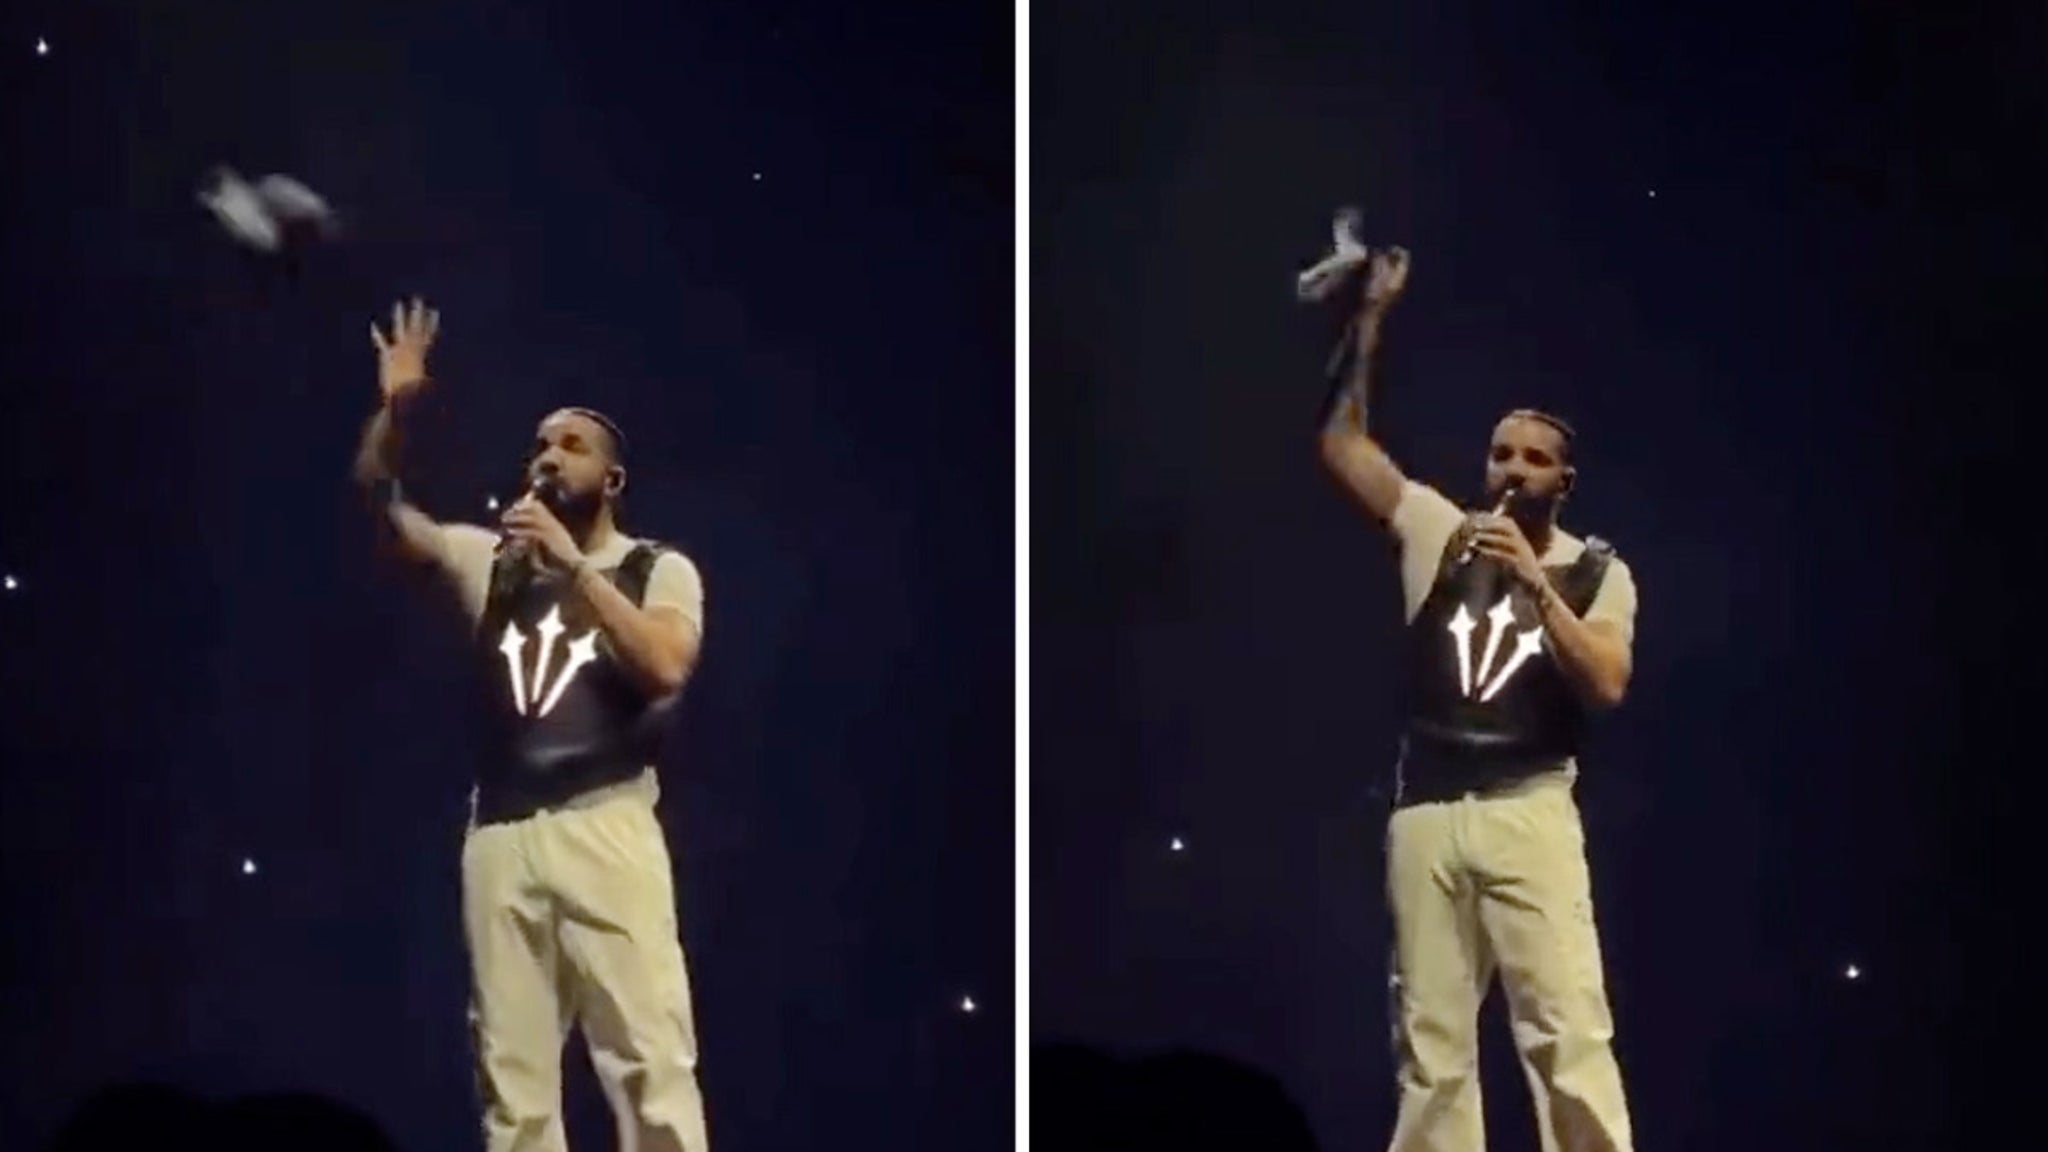 Drake Catches Book Thrown At Him Onstage, ‘You’re Lucky I’m Quick’